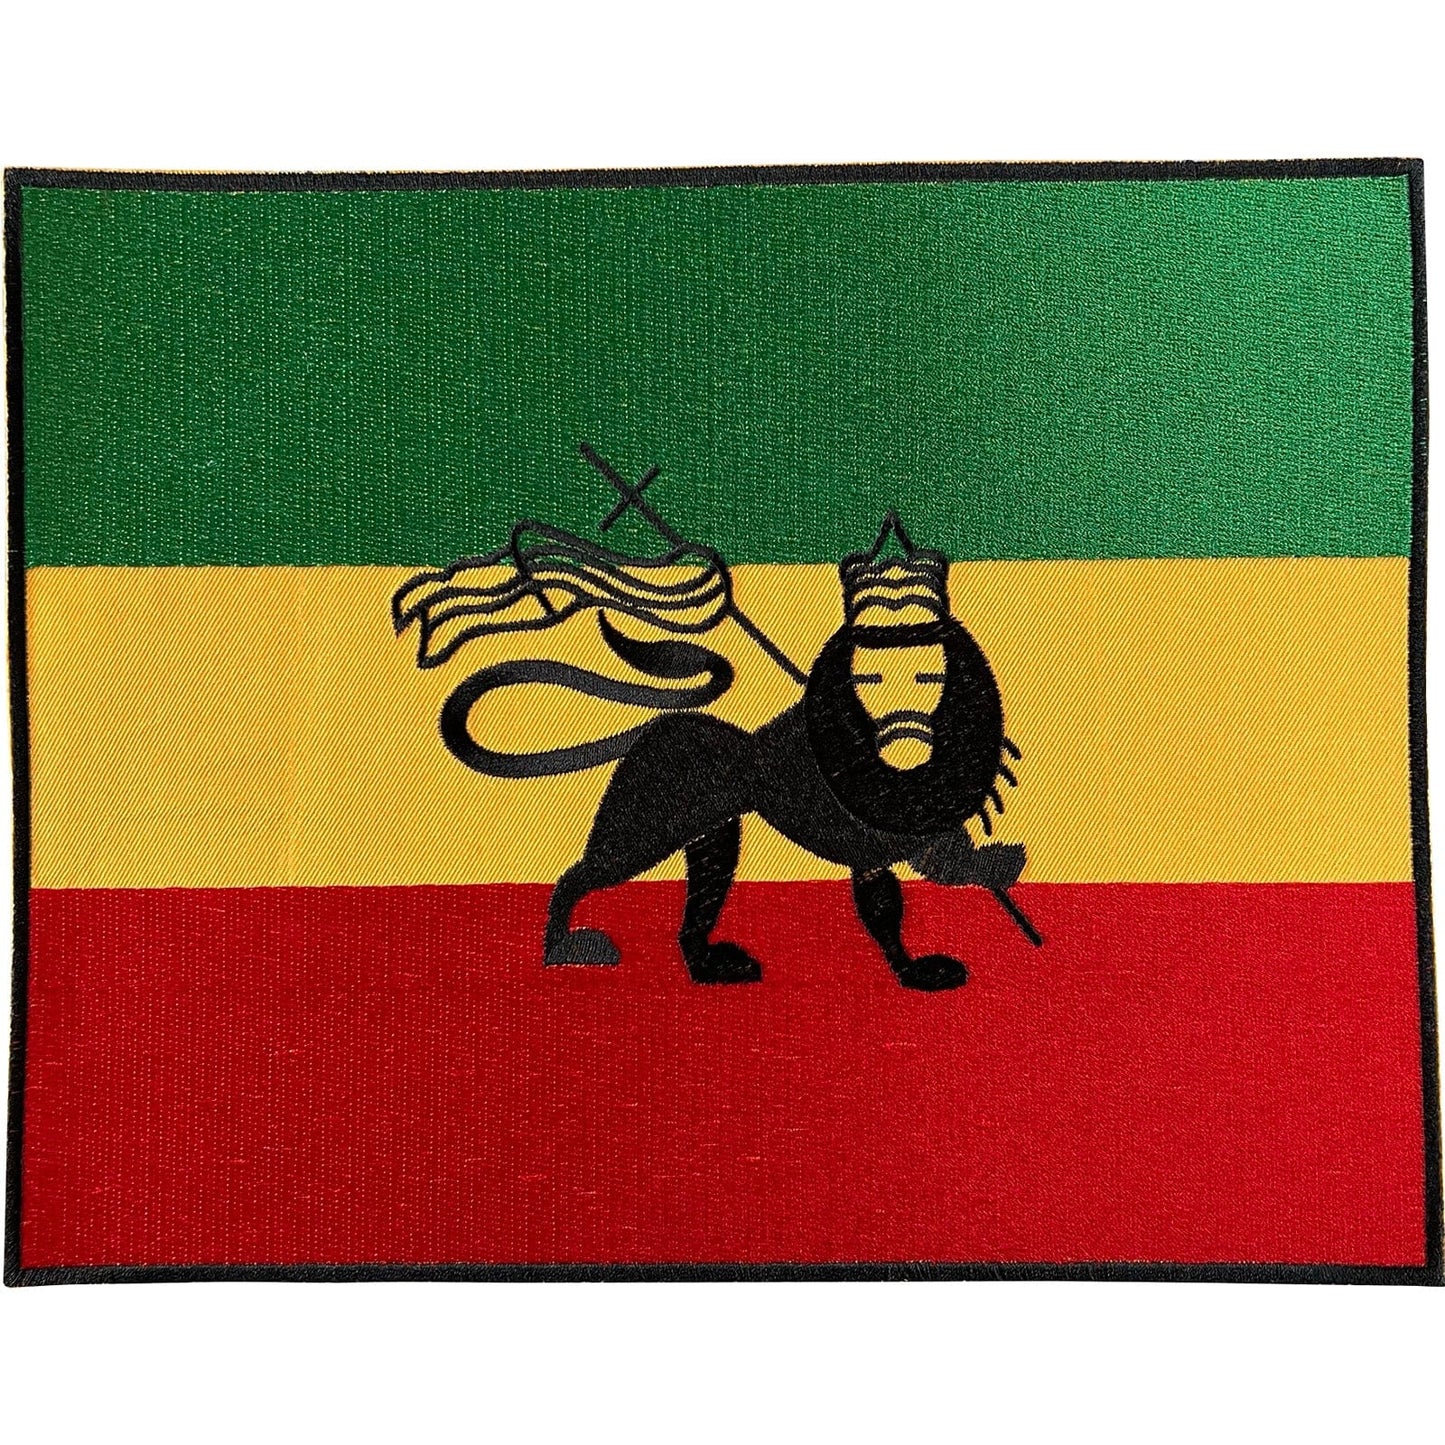 Large Lion Of Judah Flag Patch Iron Sew On Big Rasta African Embroidered Badge